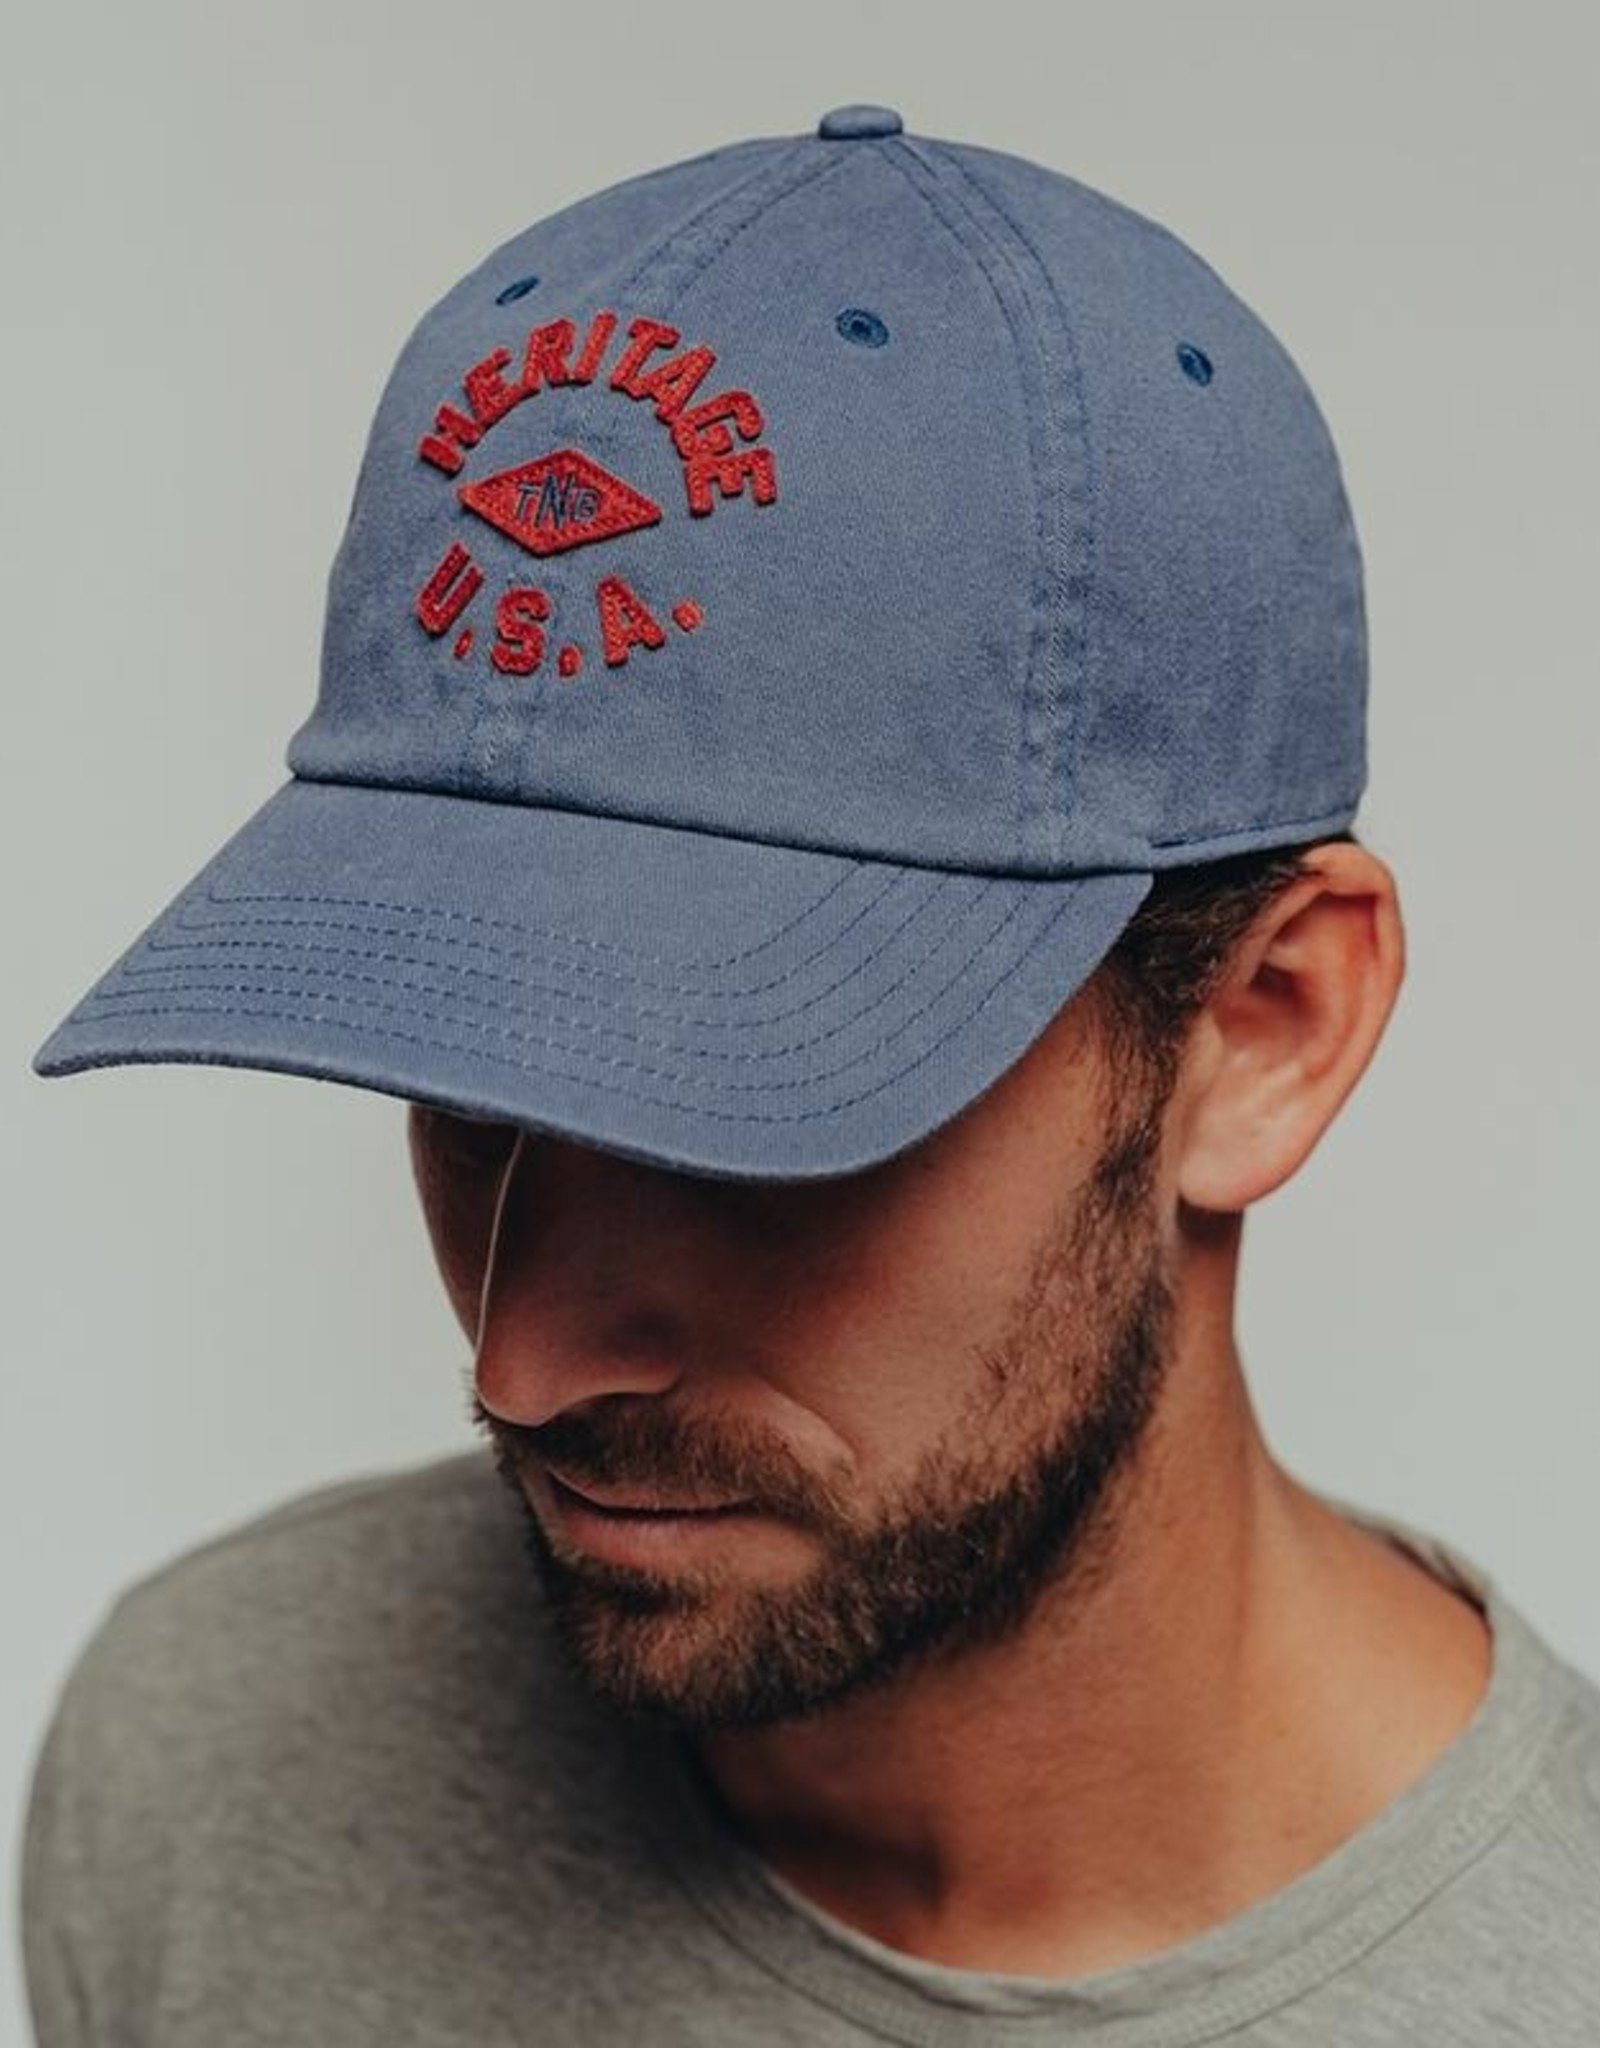 The Normal Brand Heritage USA Dad Cap